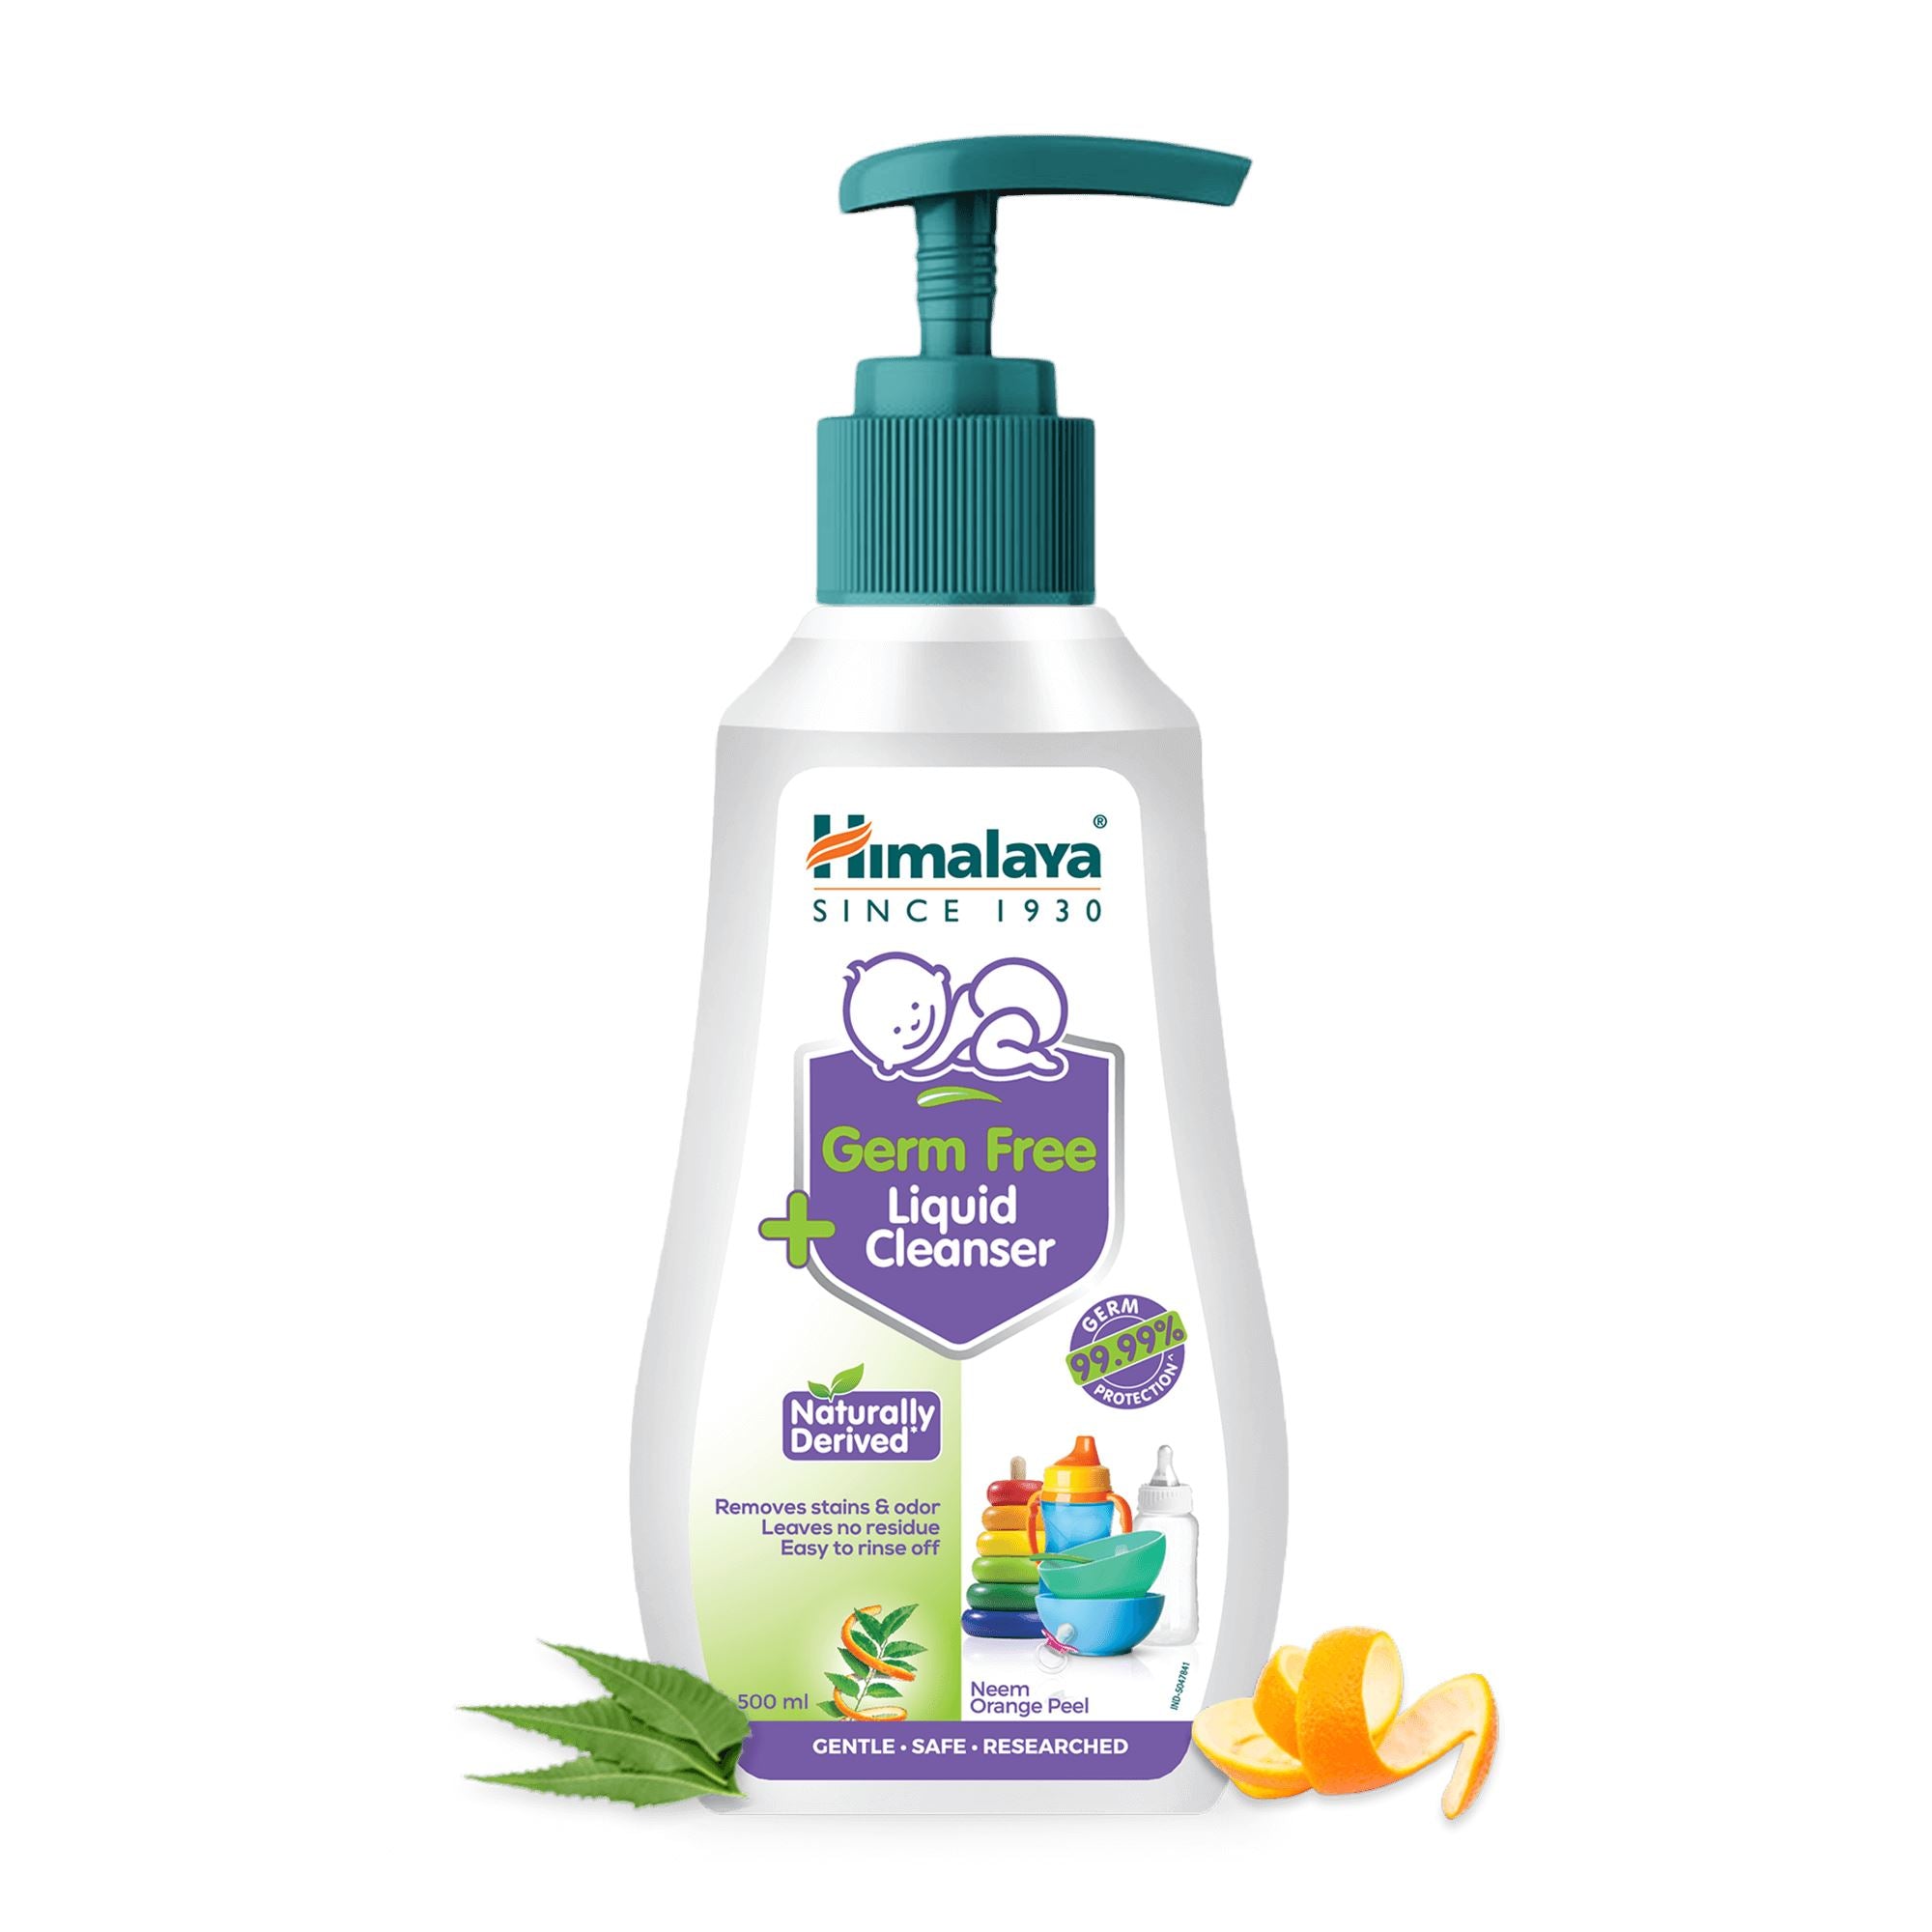 Himalaya Germ Free Liquid Cleanser 500ml Bottle - Cleanses Baby’s Accessories & Toys